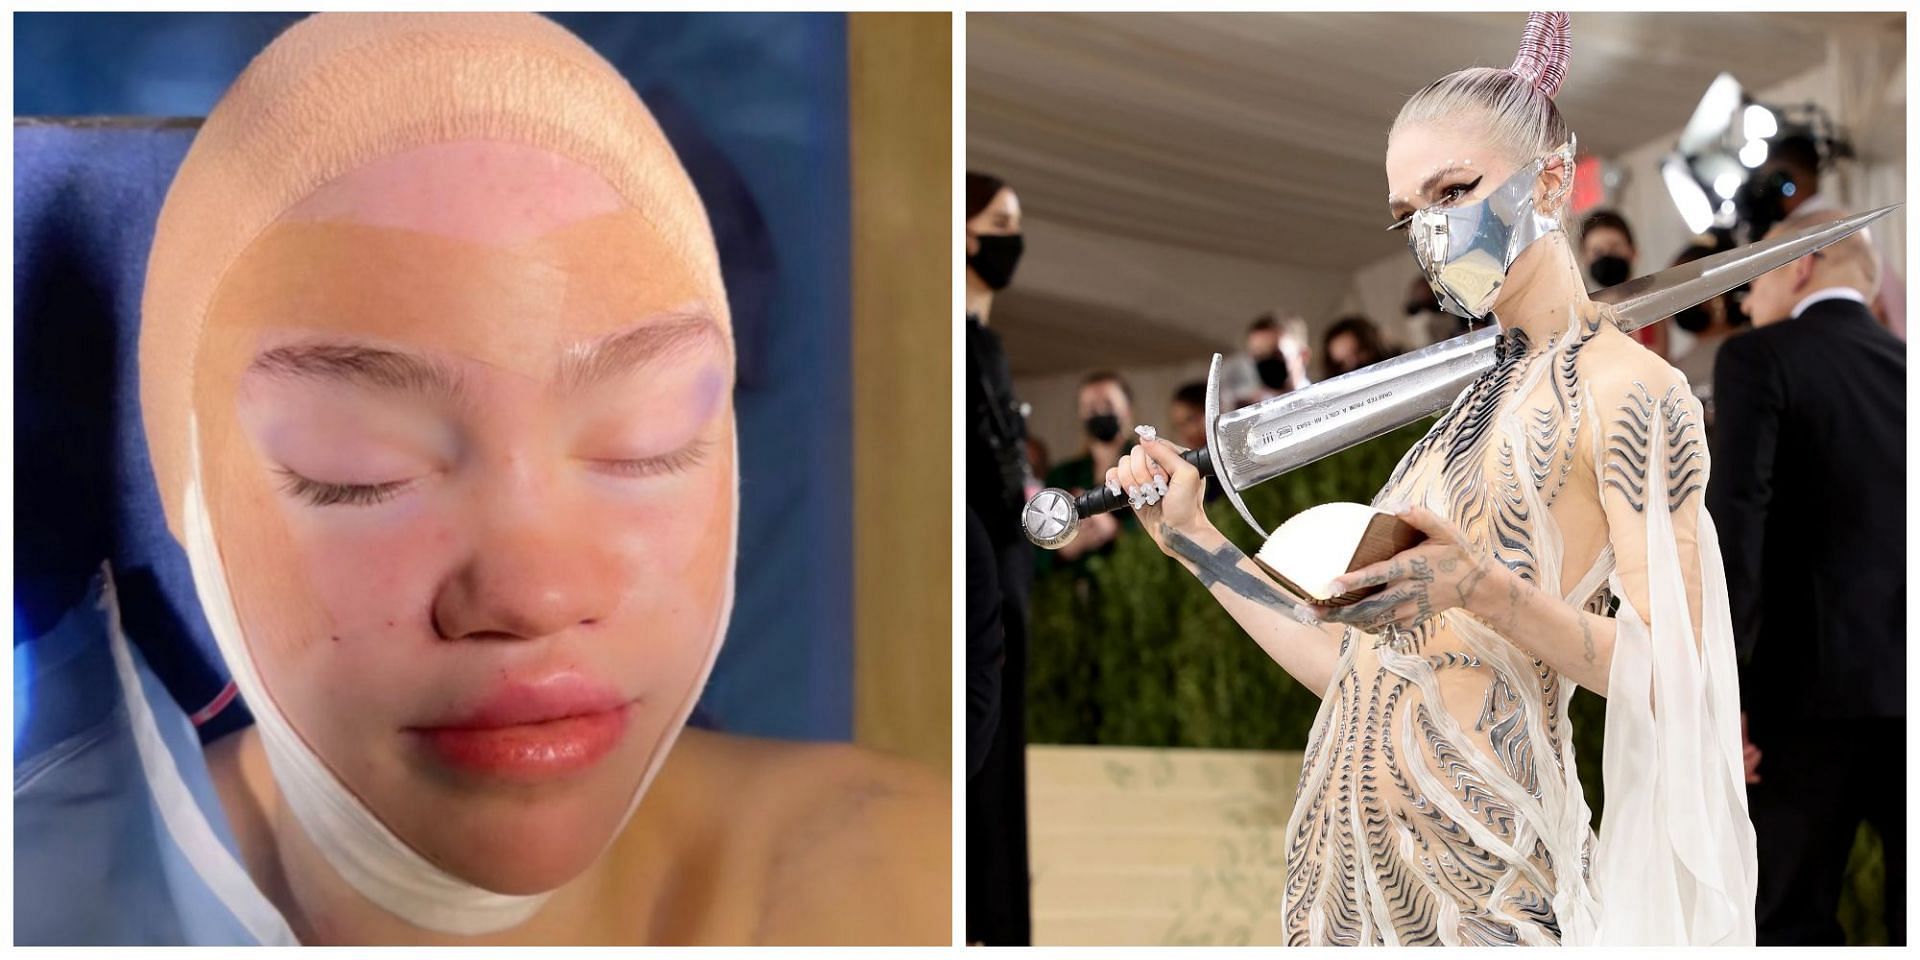 Did Grimes get an &quot;elf ear&quot; surgery? Netizens troll the musician after she posted a picture of herself with bandages on Twitter. (Image via Twitter)